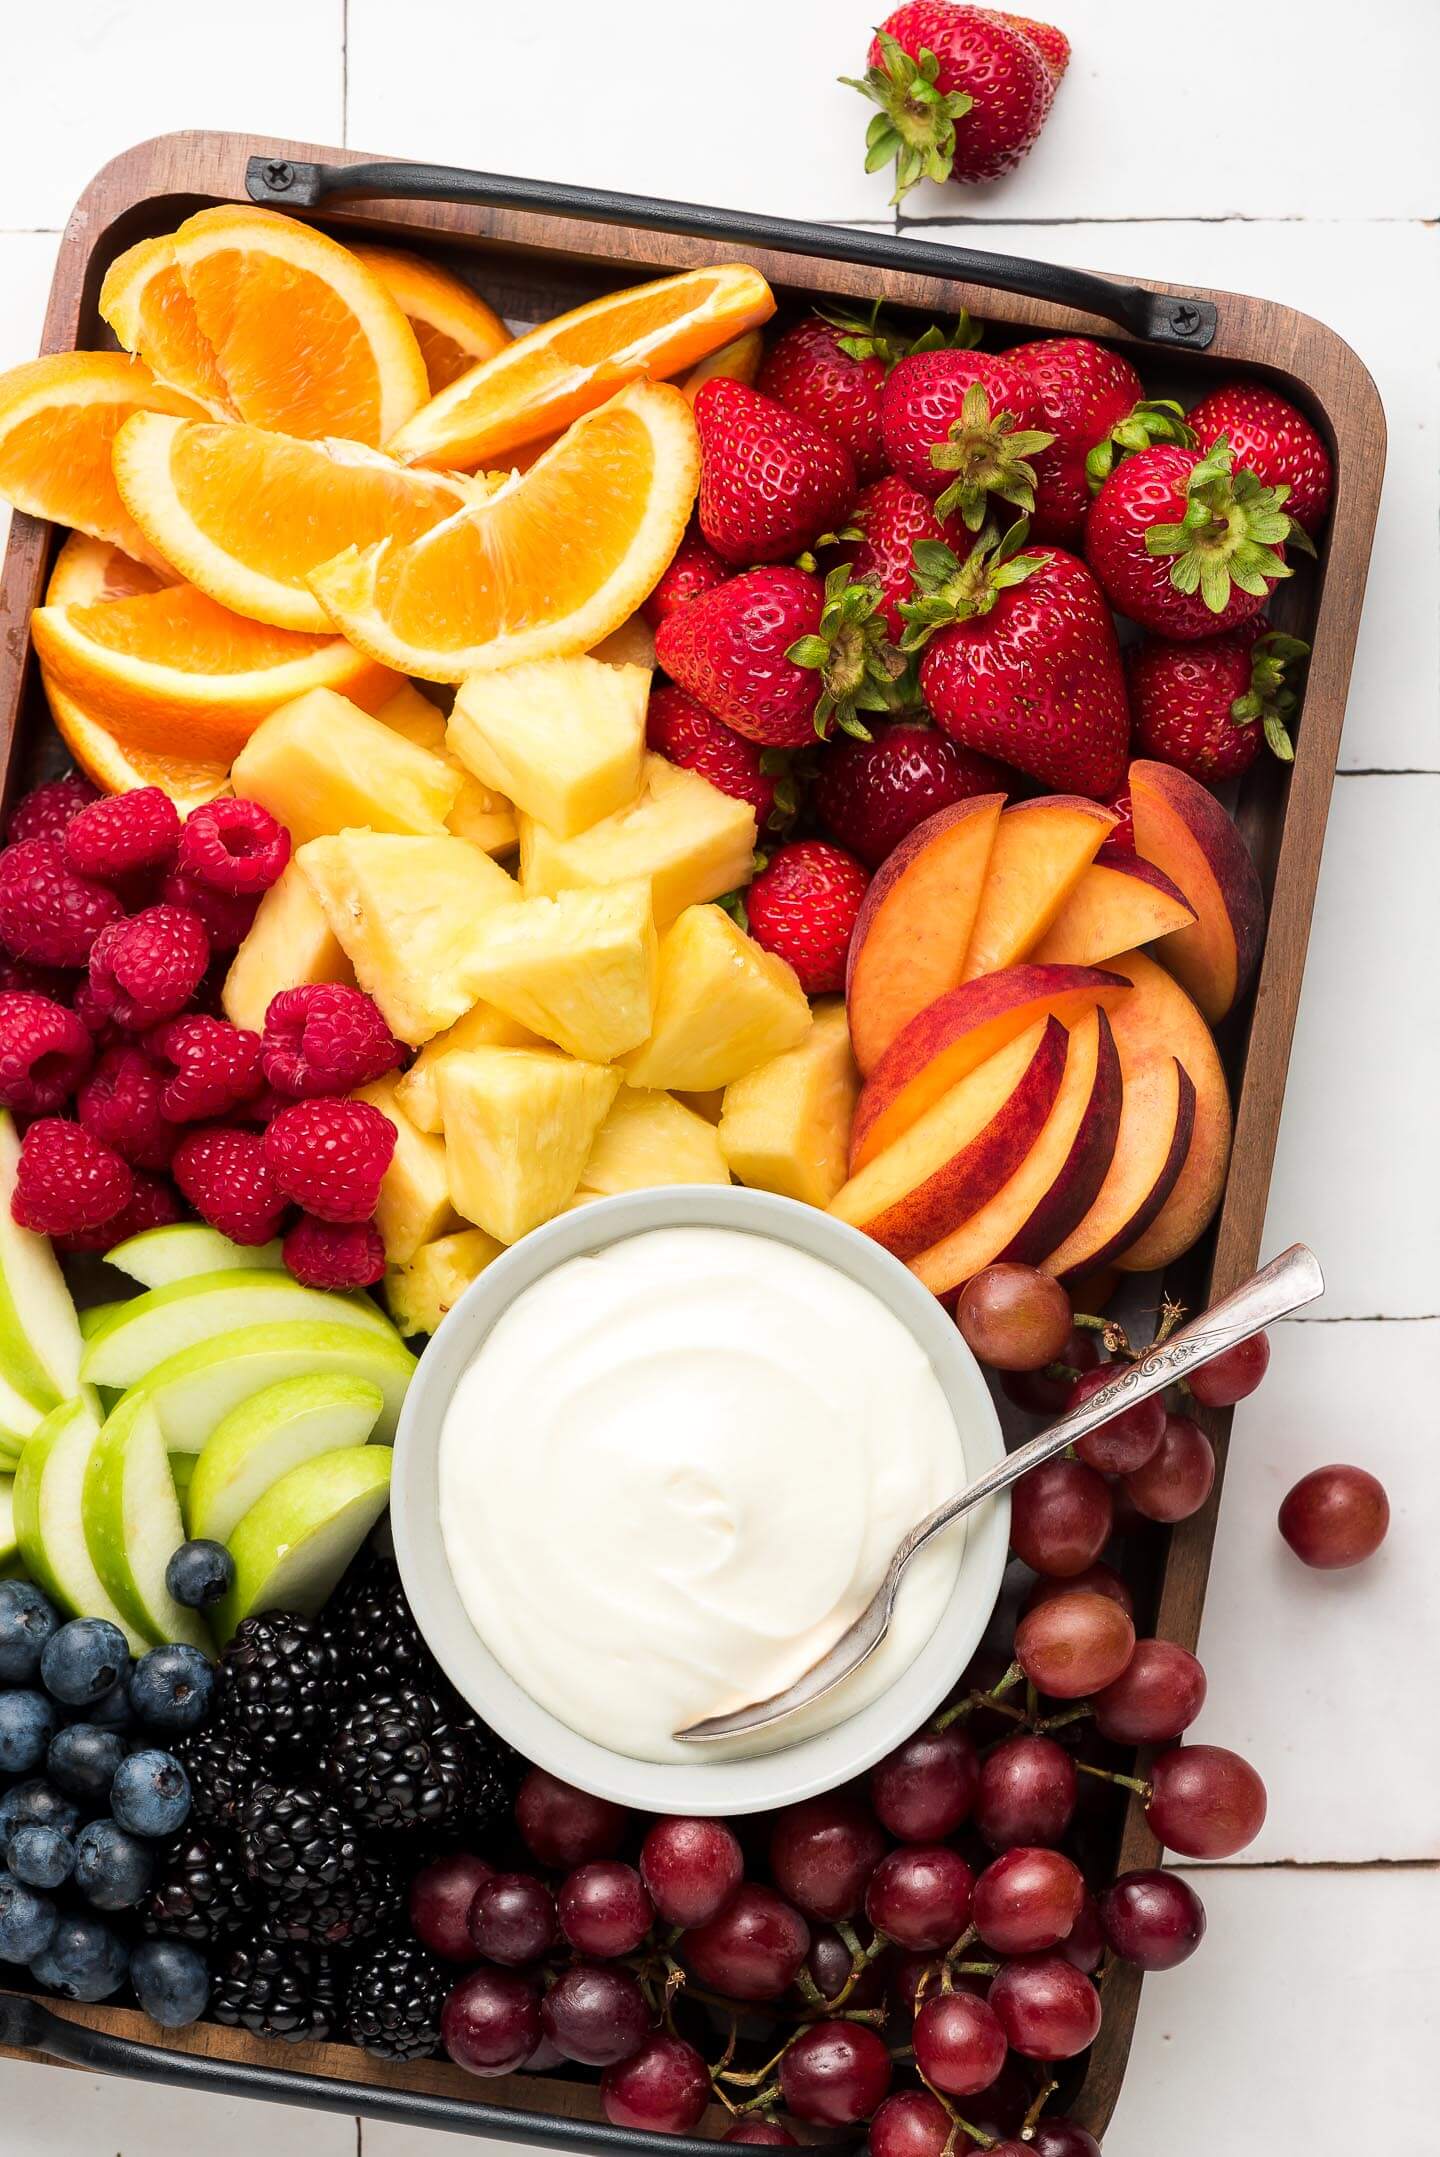 A big wooden tray loaded with colorful fruit and a small bowl of marshmallow fruit dip.